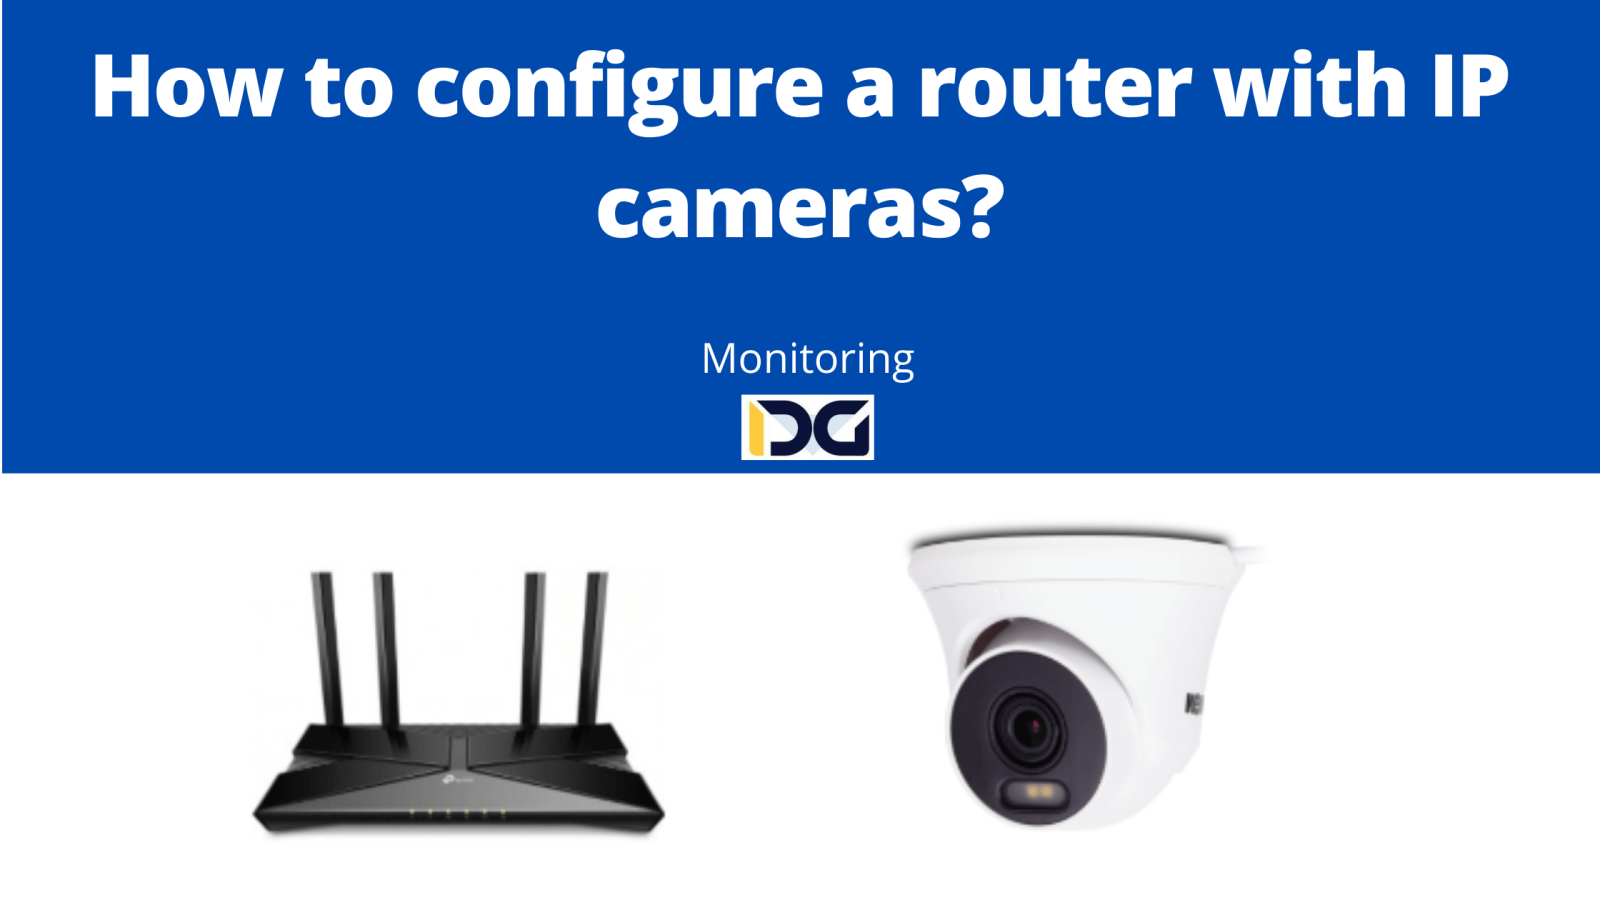 How to configure a router with IP cameras?